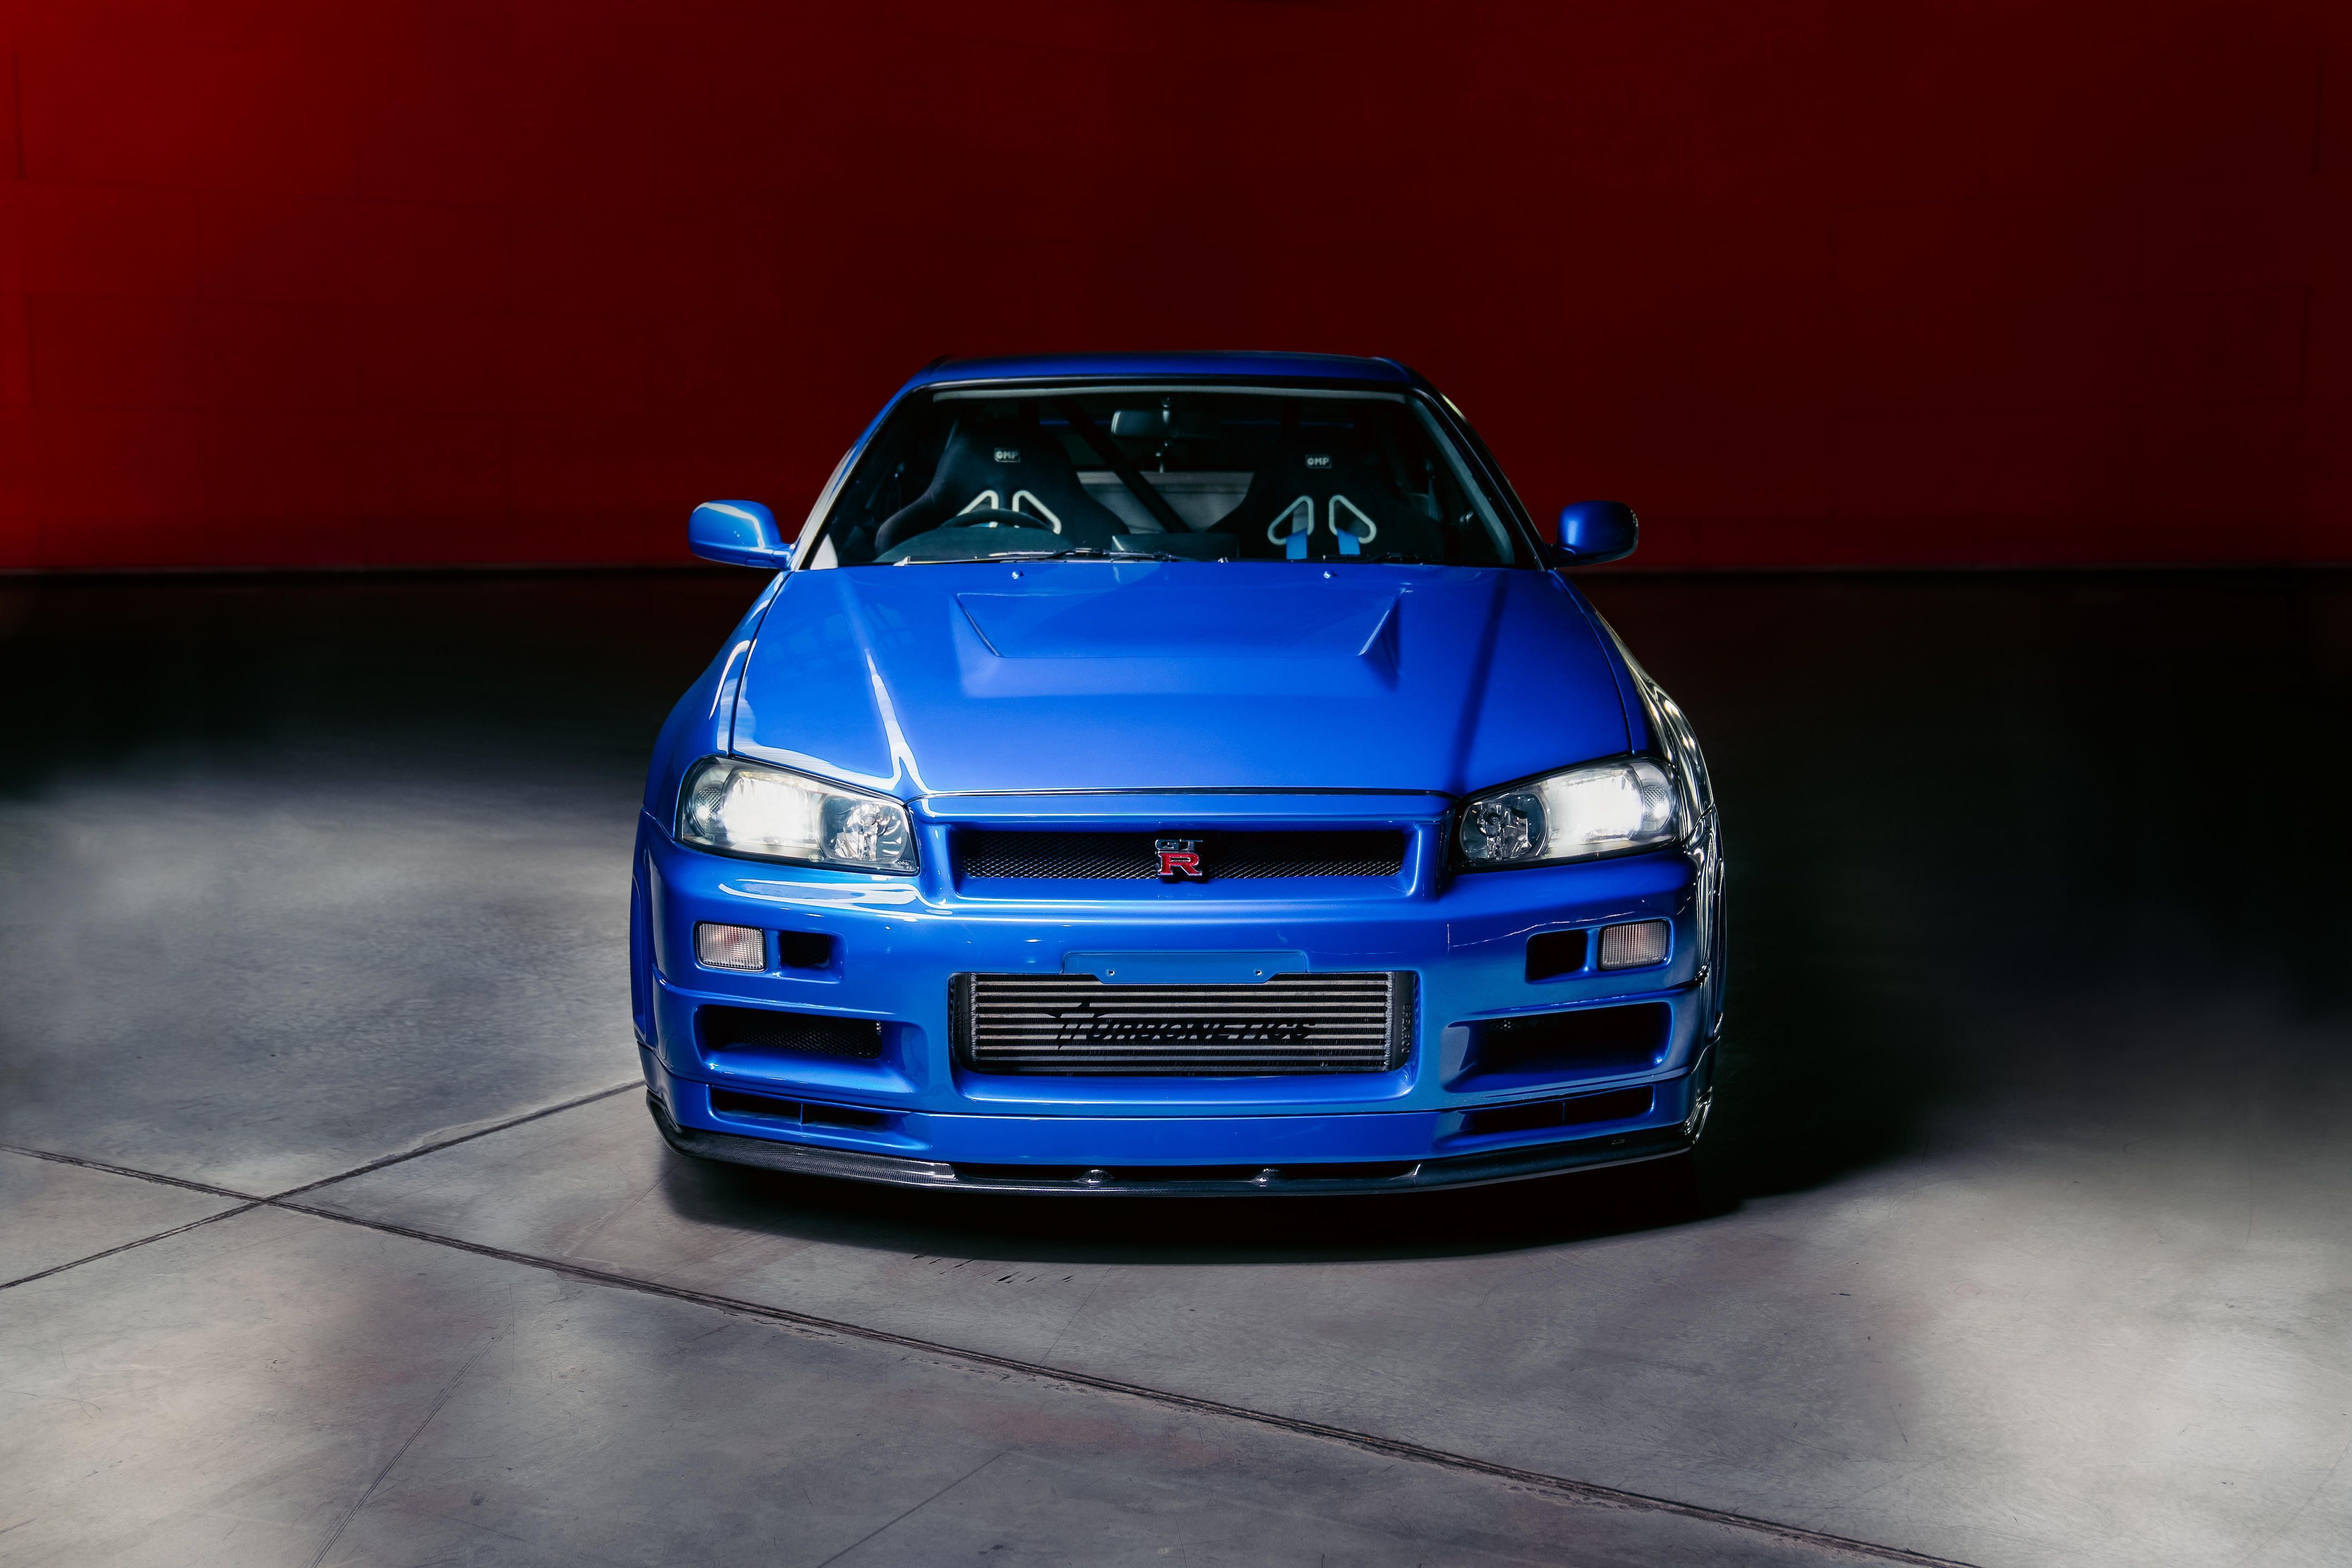 Paul Walker's “Fast & Furious” Nissan GT-R gets $1.4 million price tag